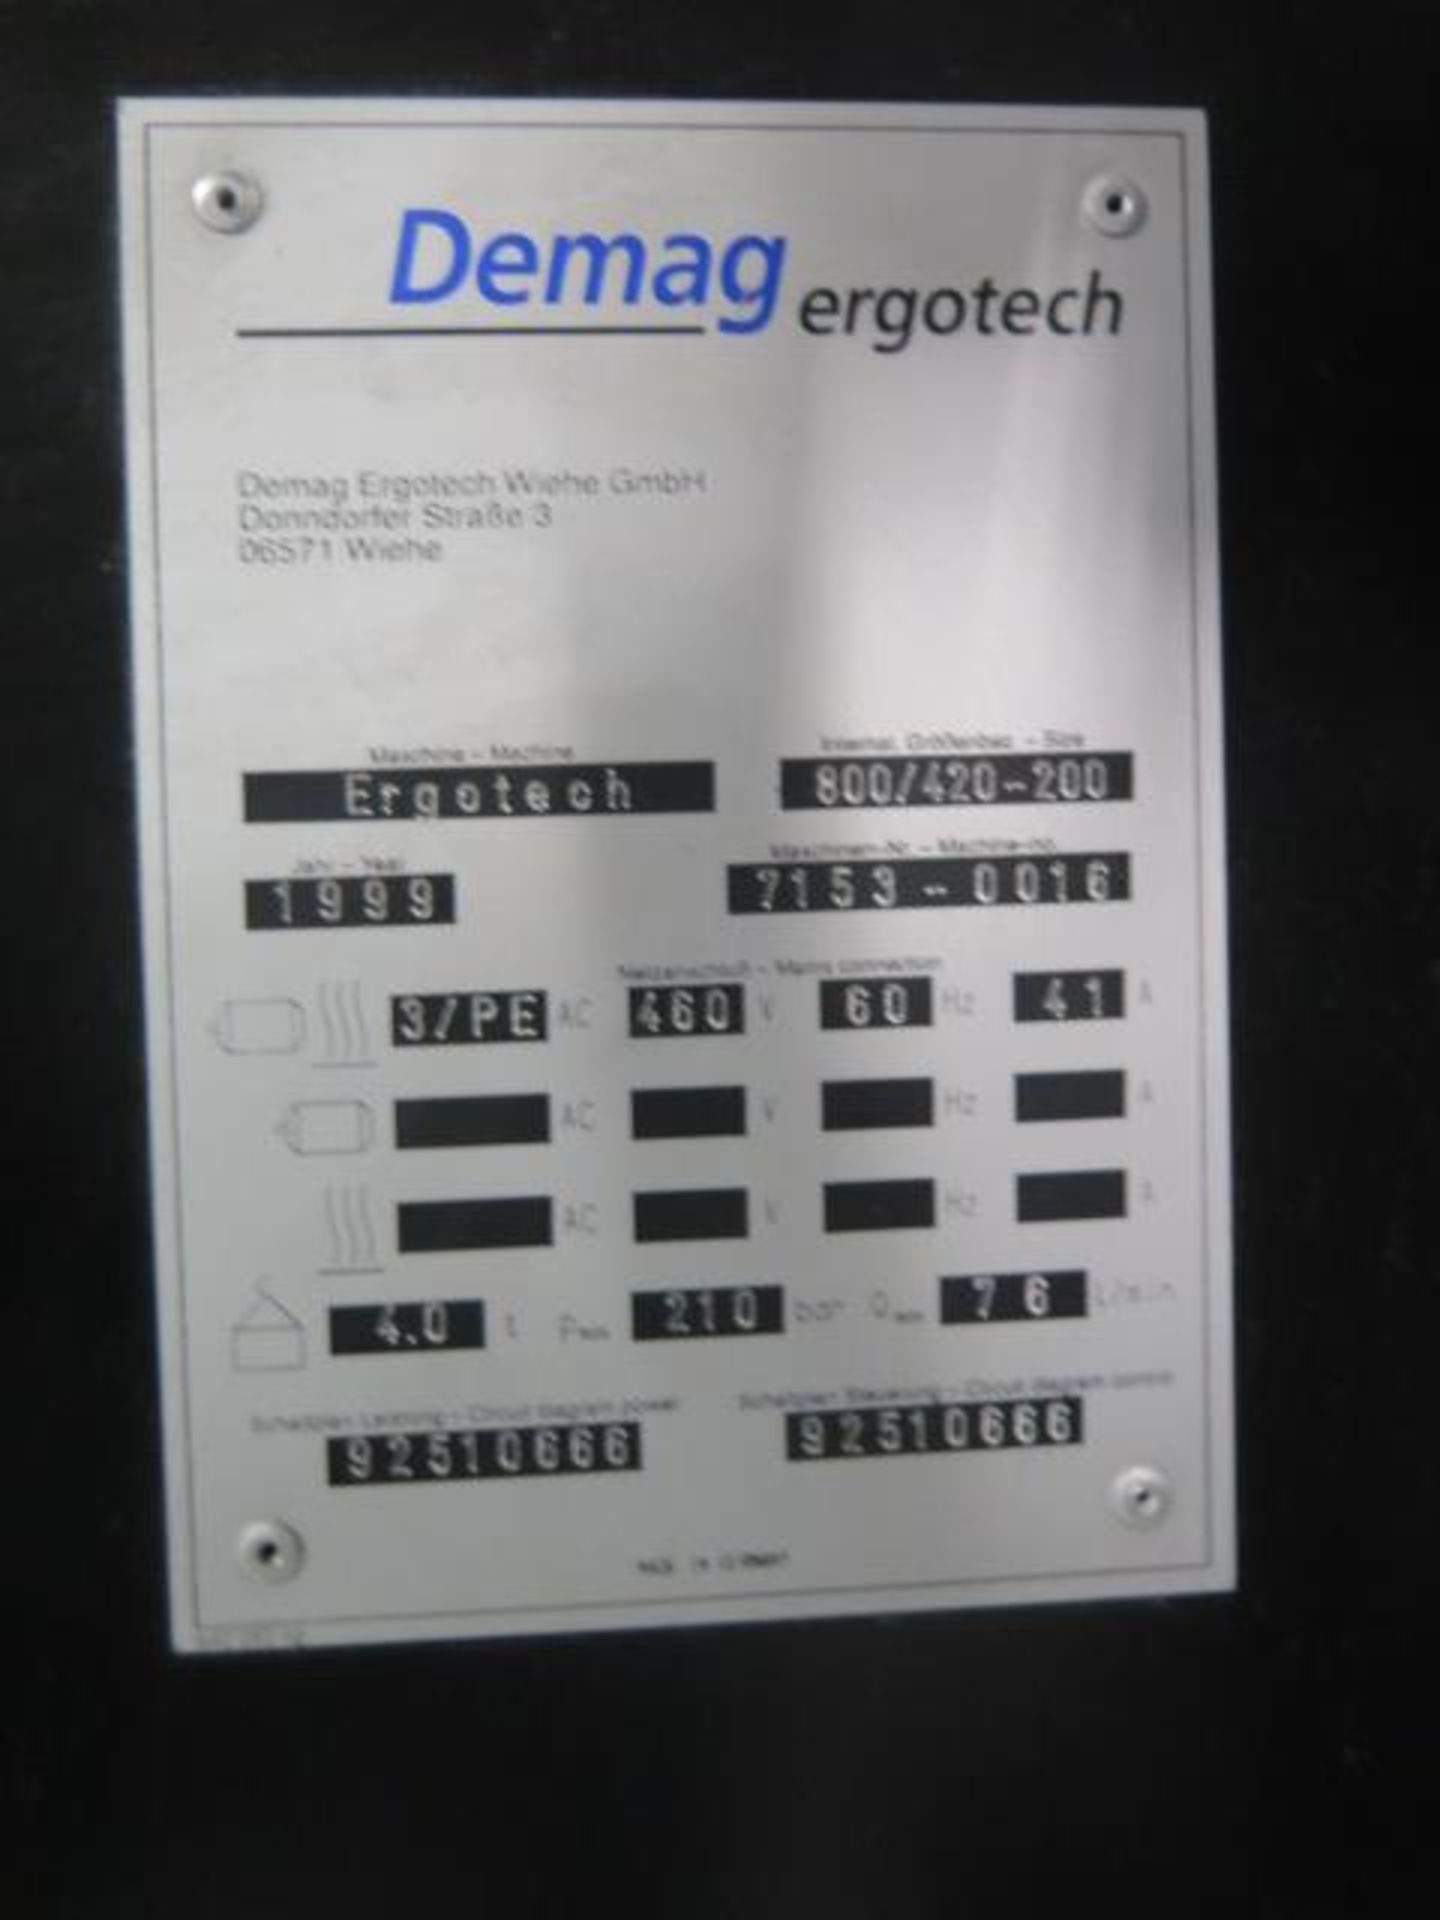 Demag Ergotech 800/420-200 80-Ton Plastic Injection Molding s/n 7153-0016 w/ Demag NC4, SOLD AS IS - Image 19 of 20